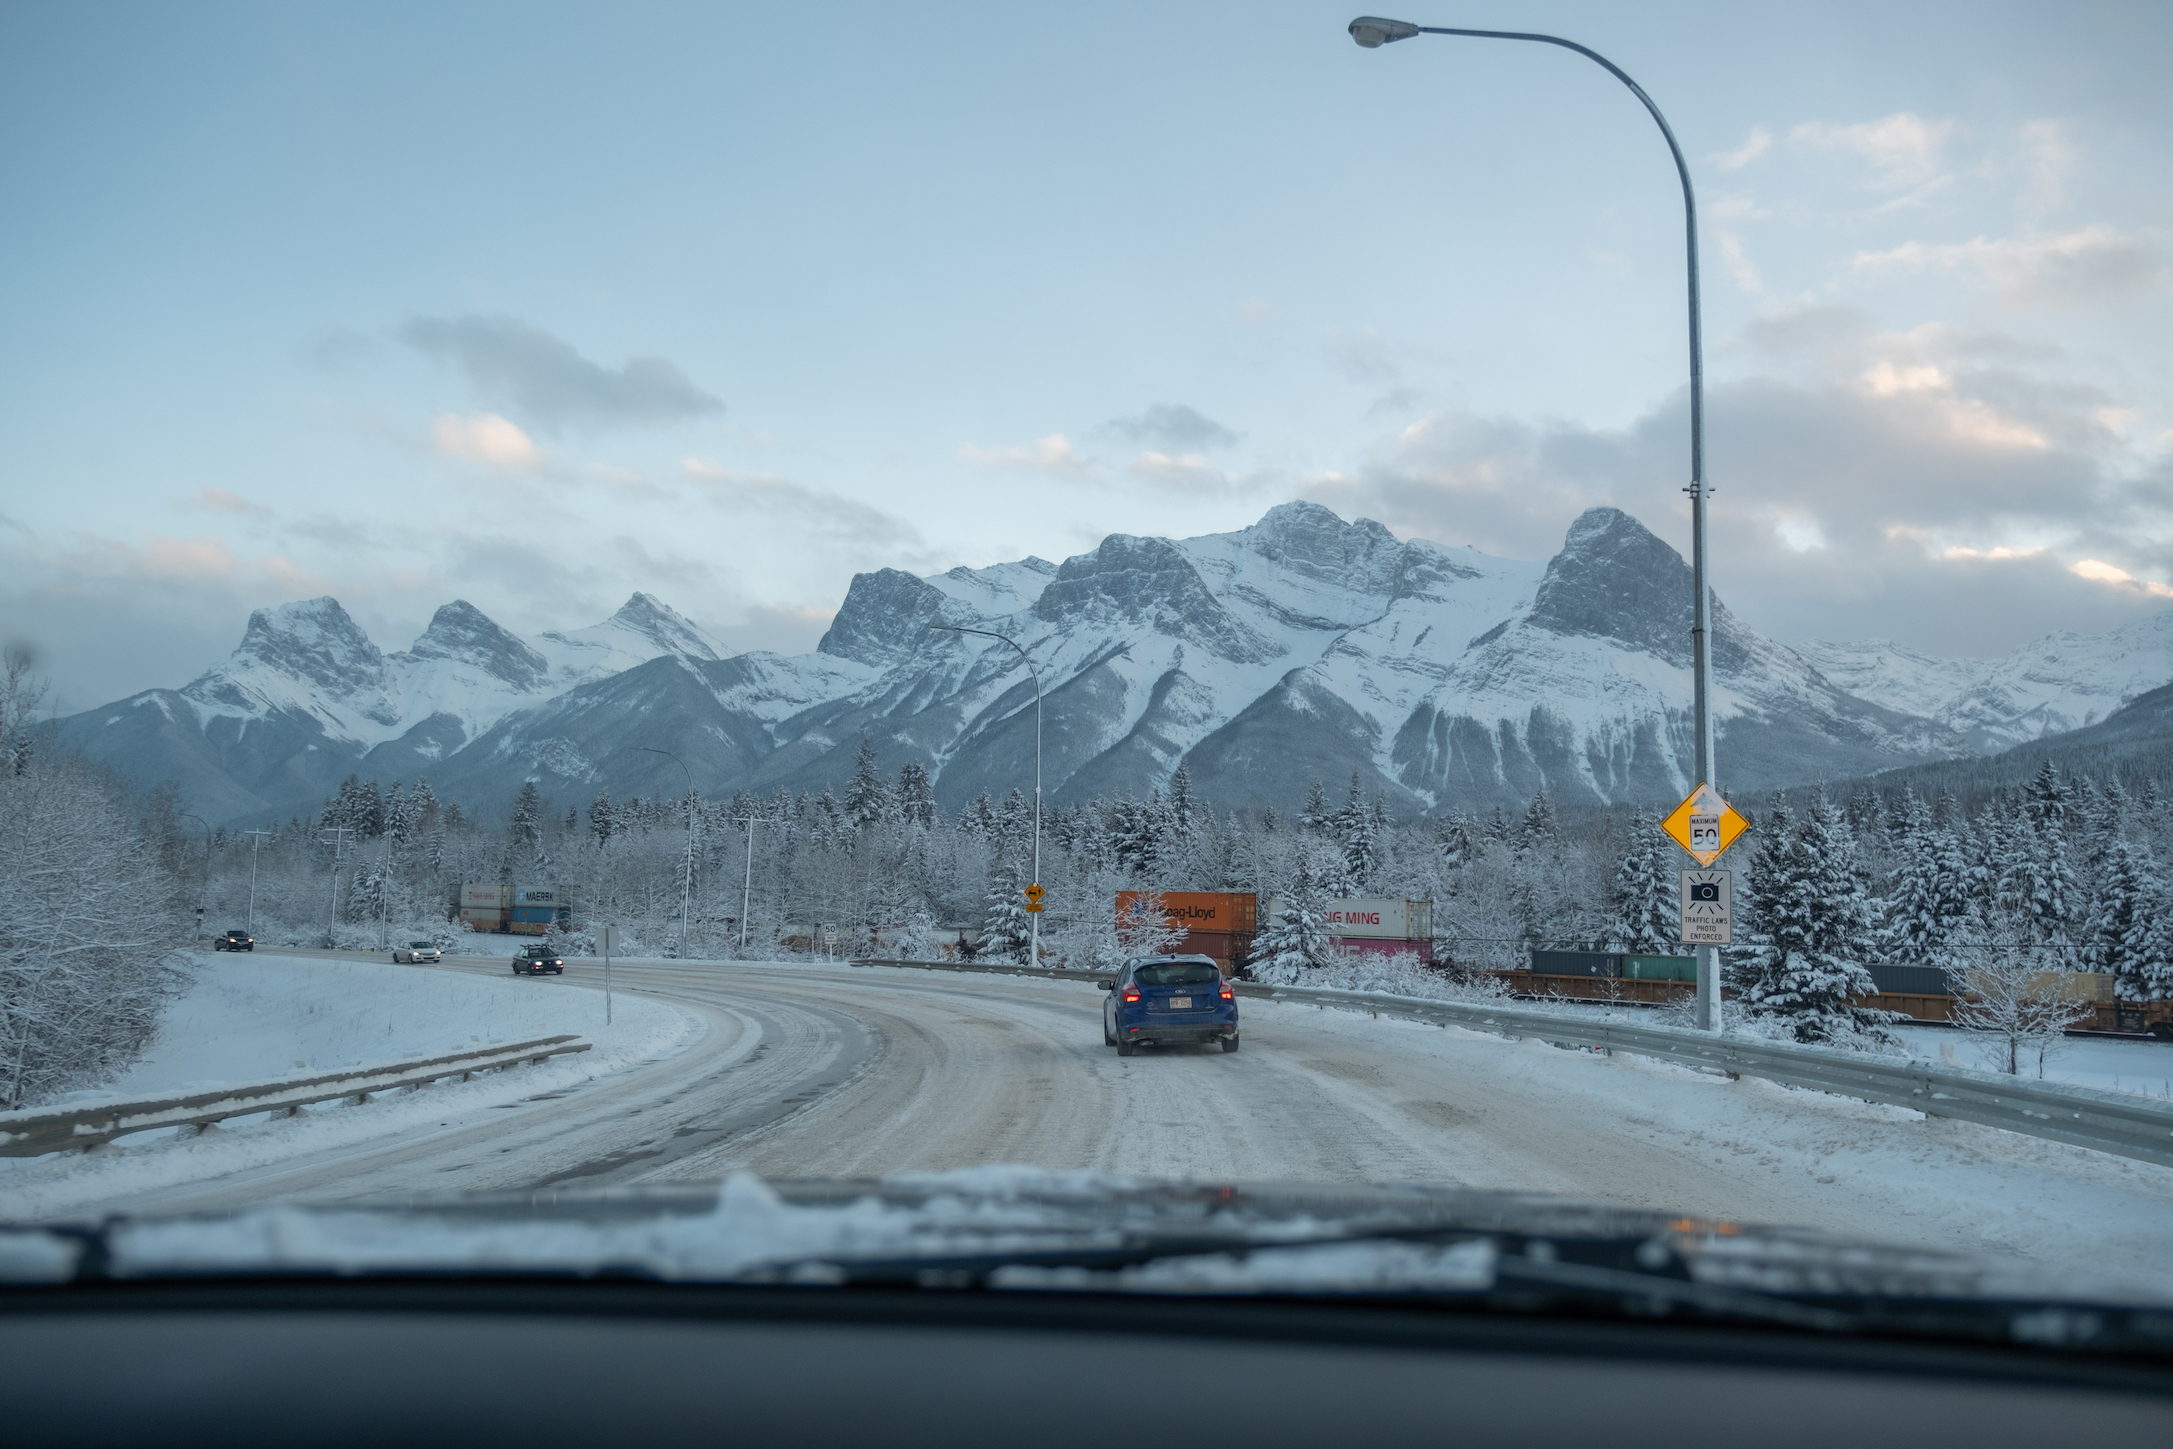 Getting to Canmore in the Winter